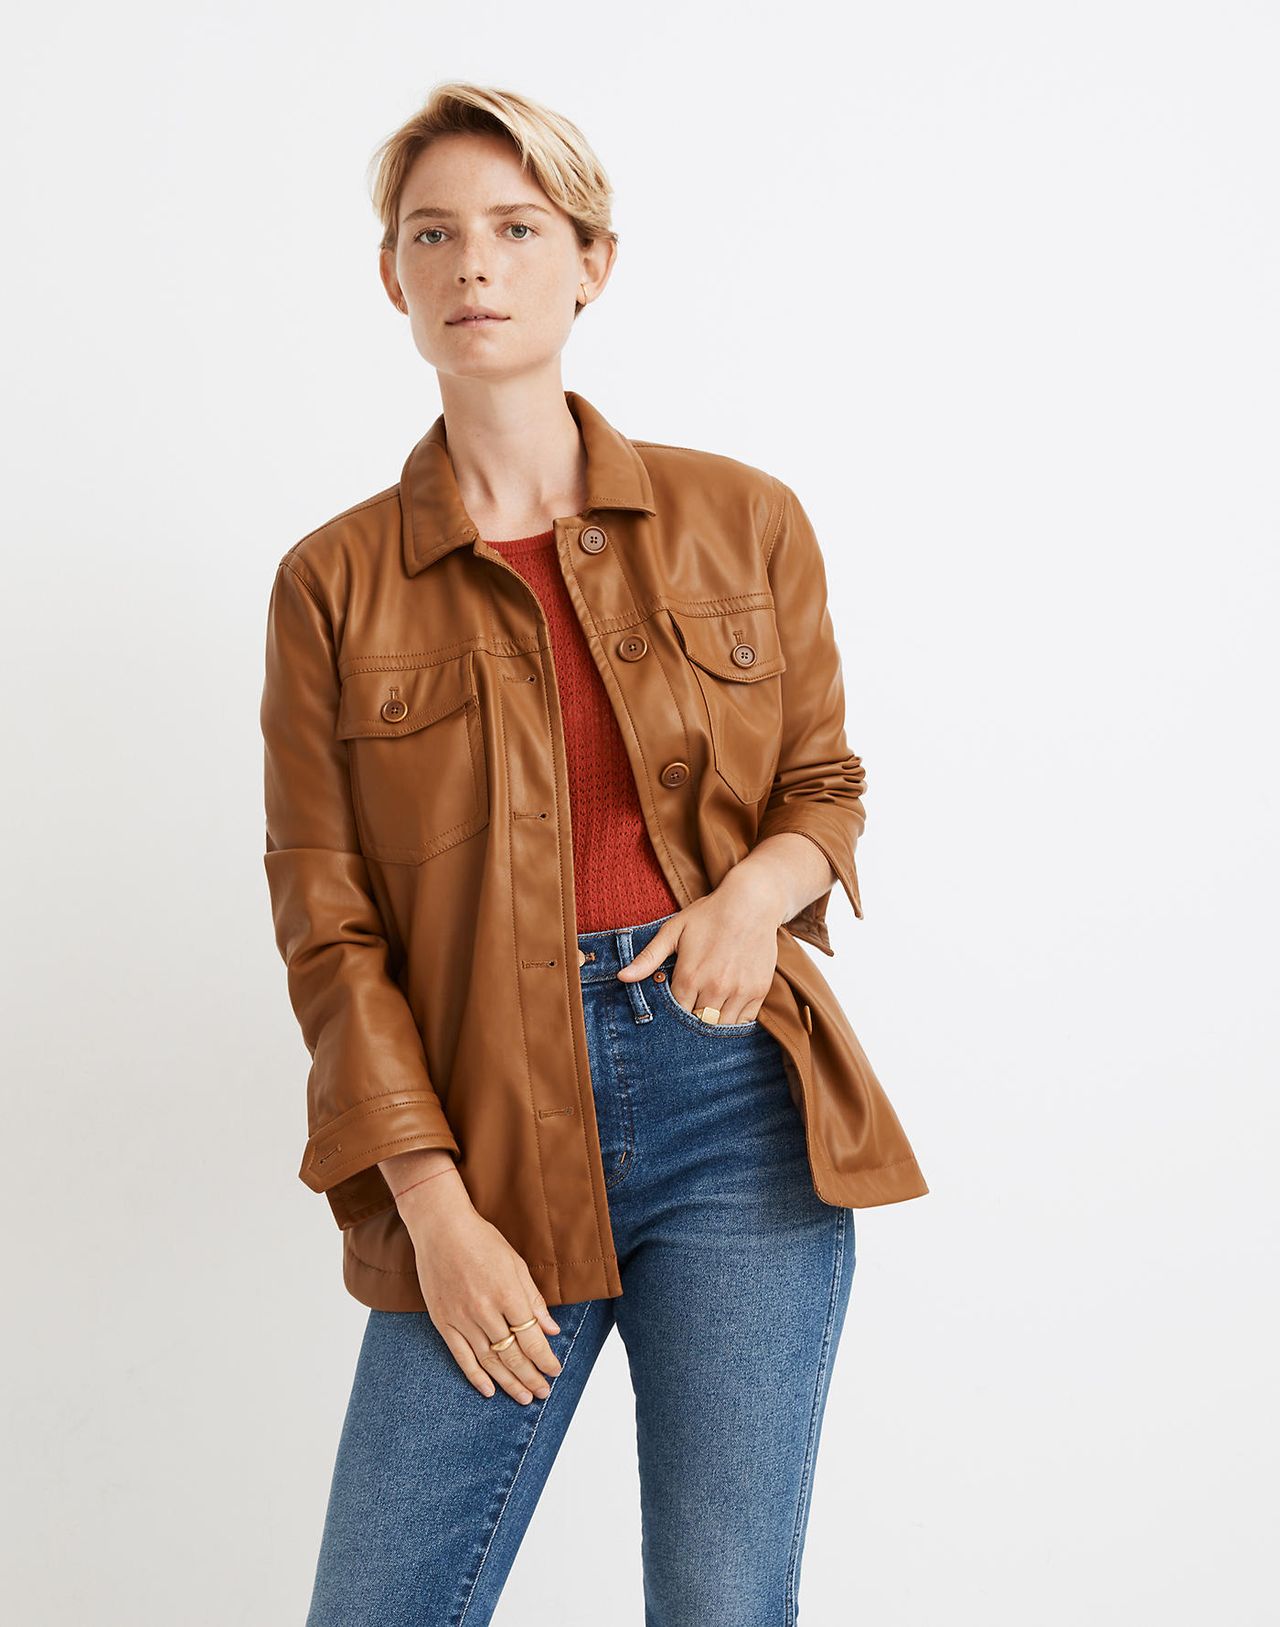 11 Perfect Faux Leather Tops to Wear With Skinny Jeans | Who What Wear